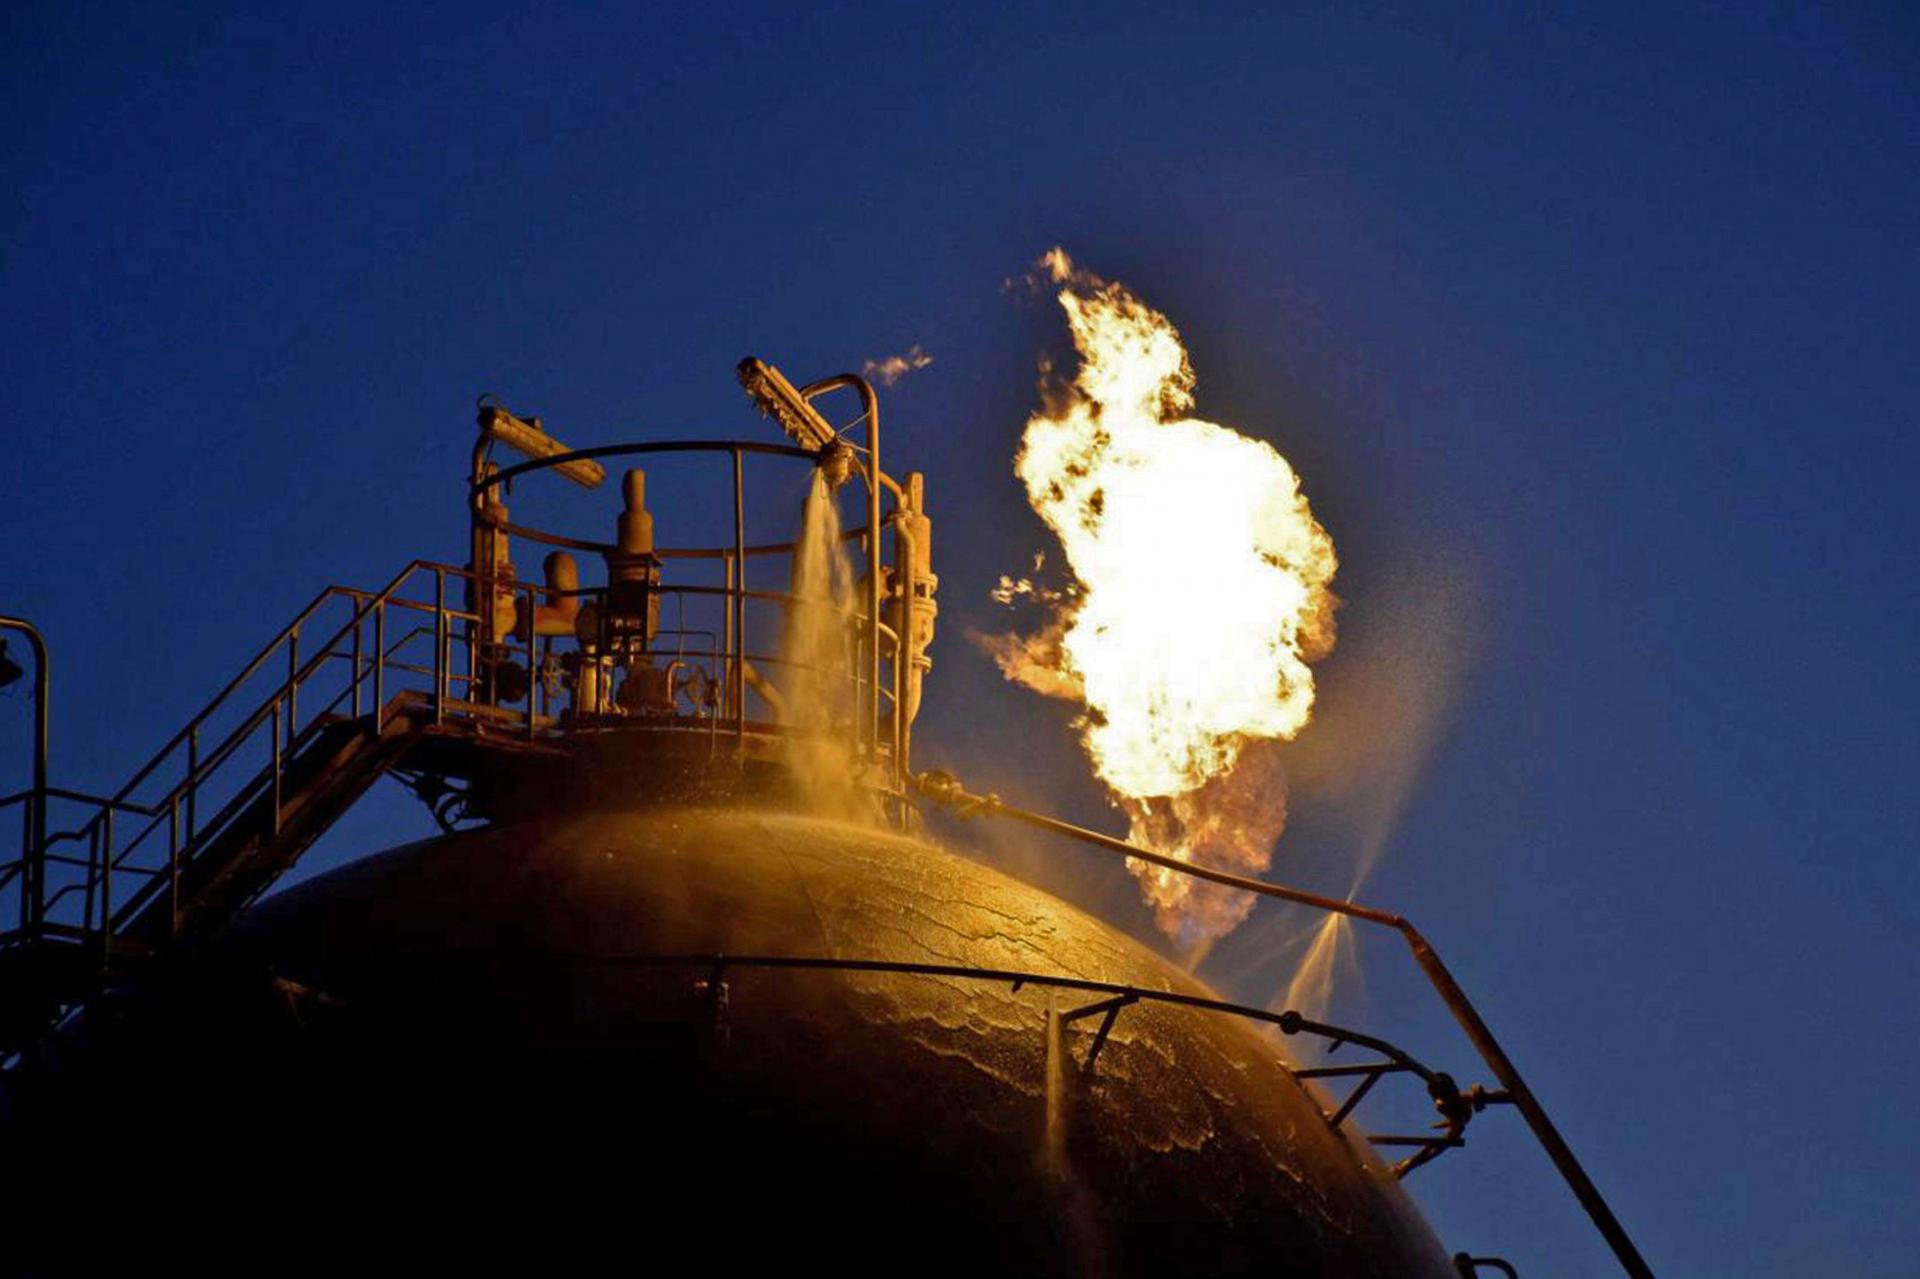 Flame erupting from an oil tank following an attack on Syria's Homs Refinery